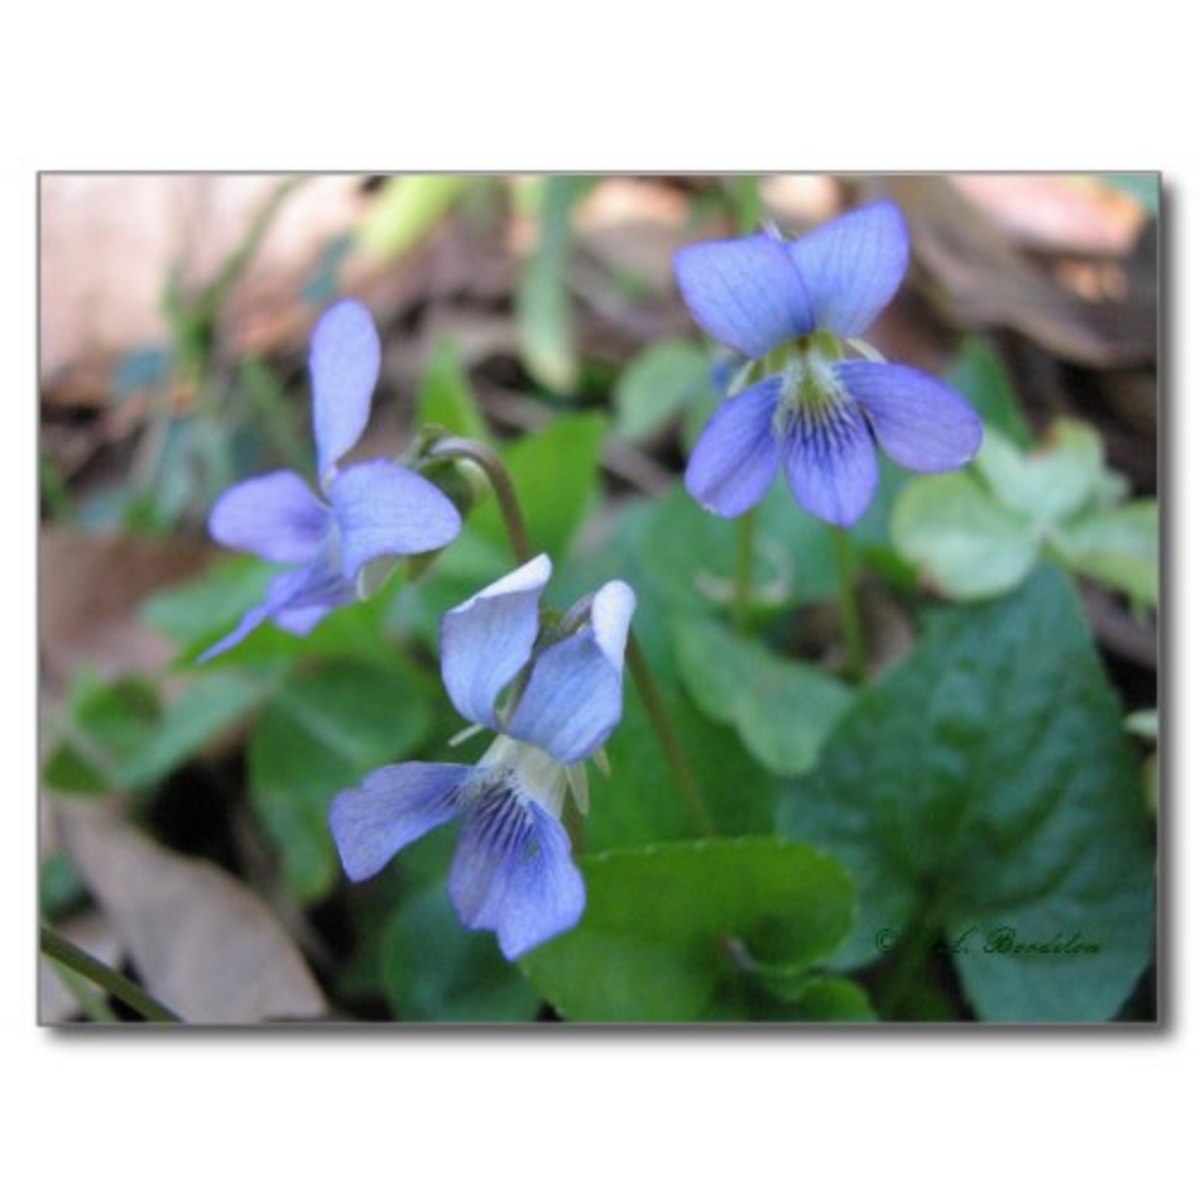 Flower color ranges from pale blue to violet. Blue is the most common color in my yard.